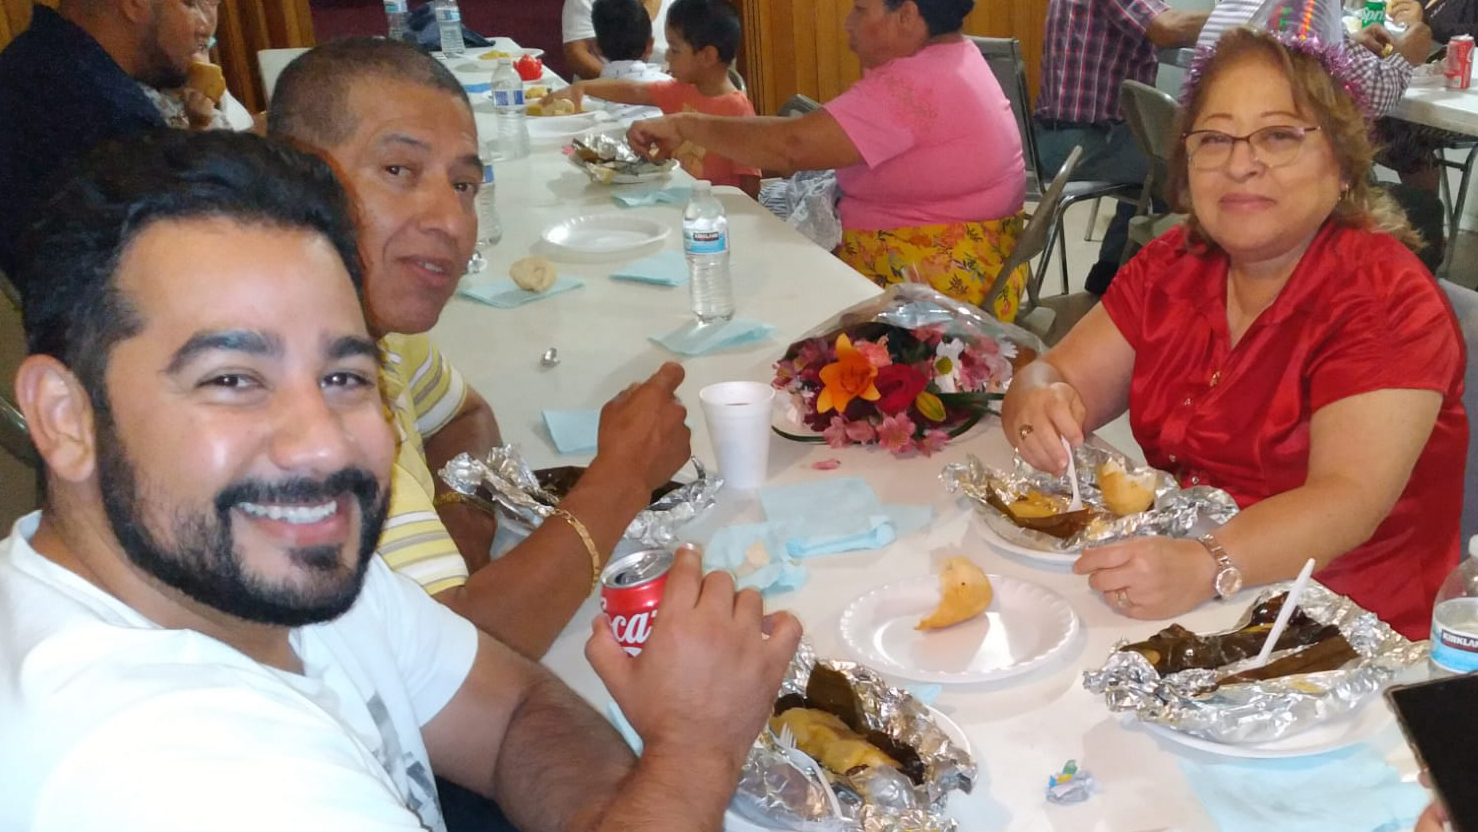 A group enjoys a hot meal provided by Mision Cristiana fe y Compasion in Van Nuys, California.